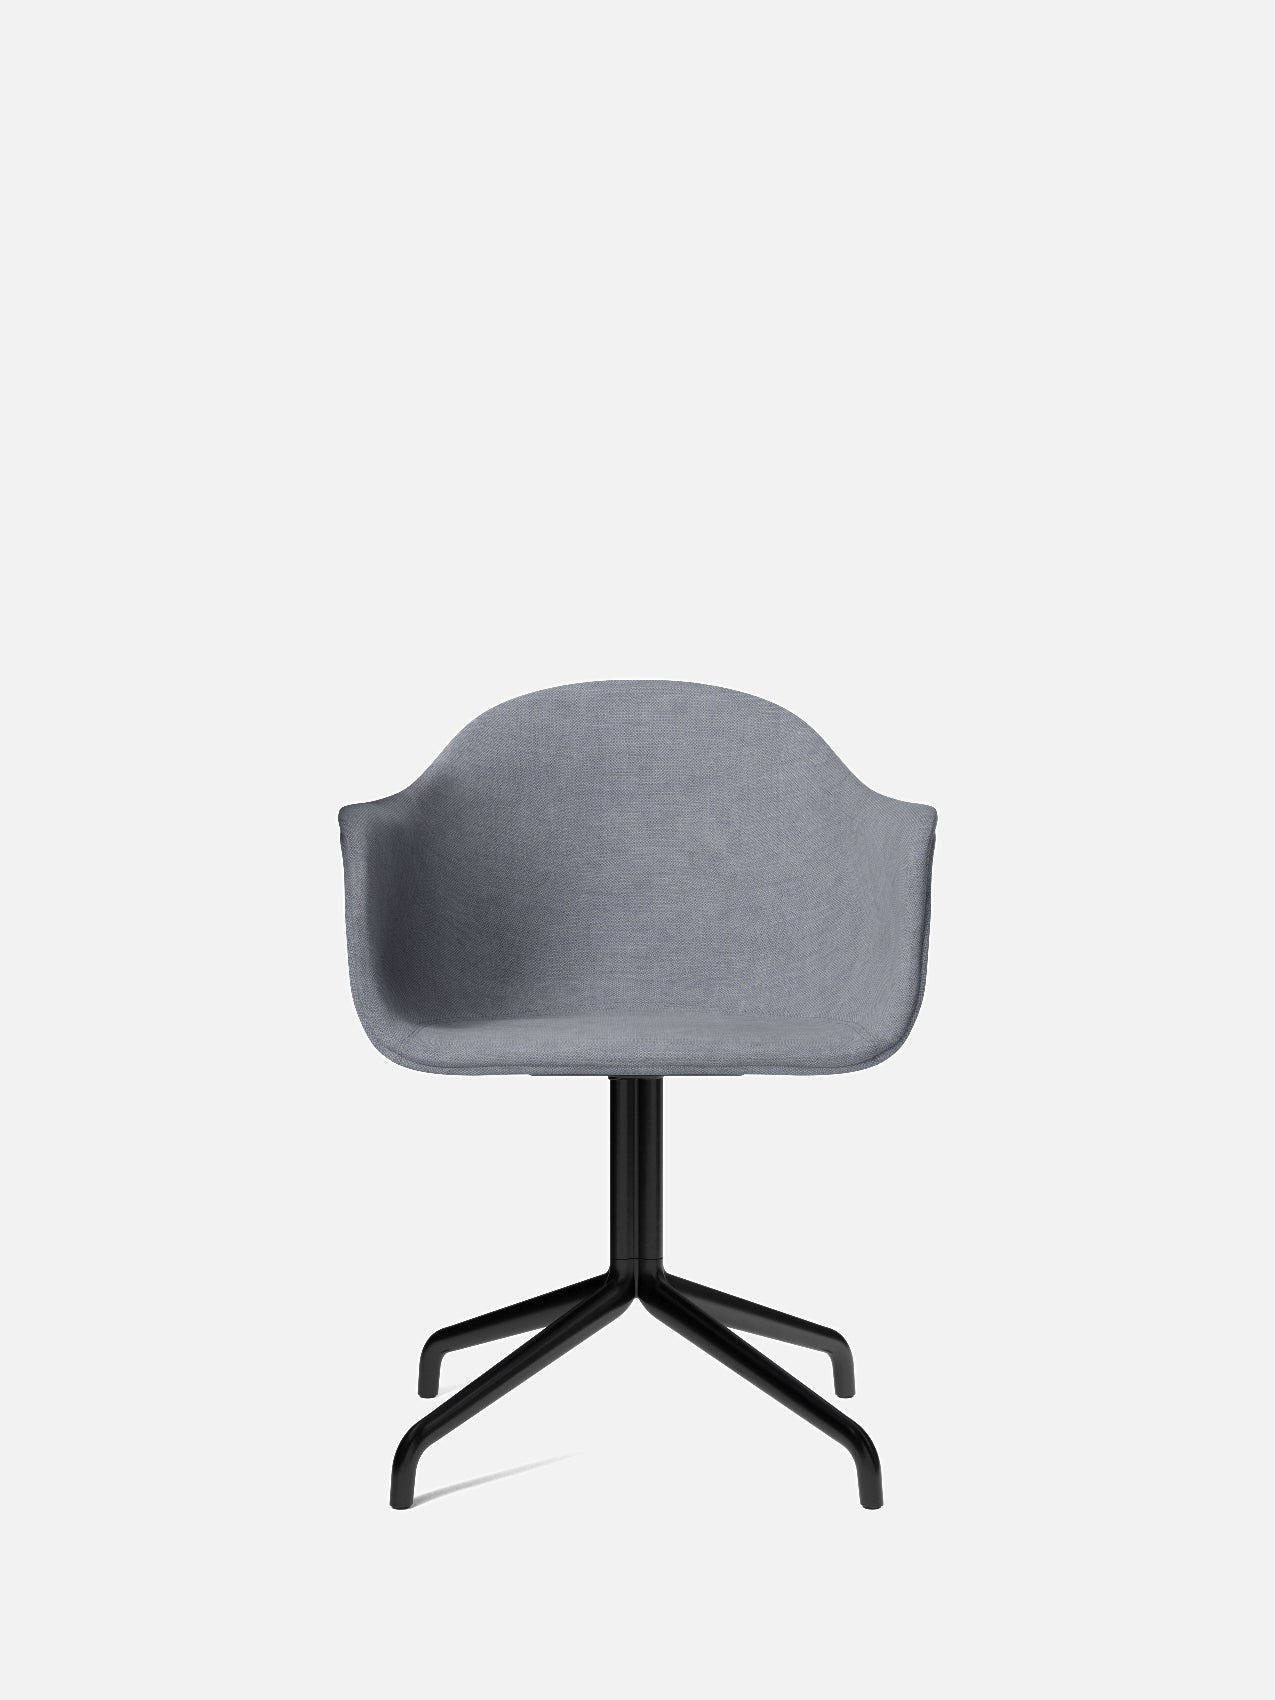 Harbour Arm Chair, Upholstered-Chair-Norm Architects-Star Base (Seat 17.7in H)/Black Steel-751/Fiord2-menu-minimalist-modern-danish-design-home-decor